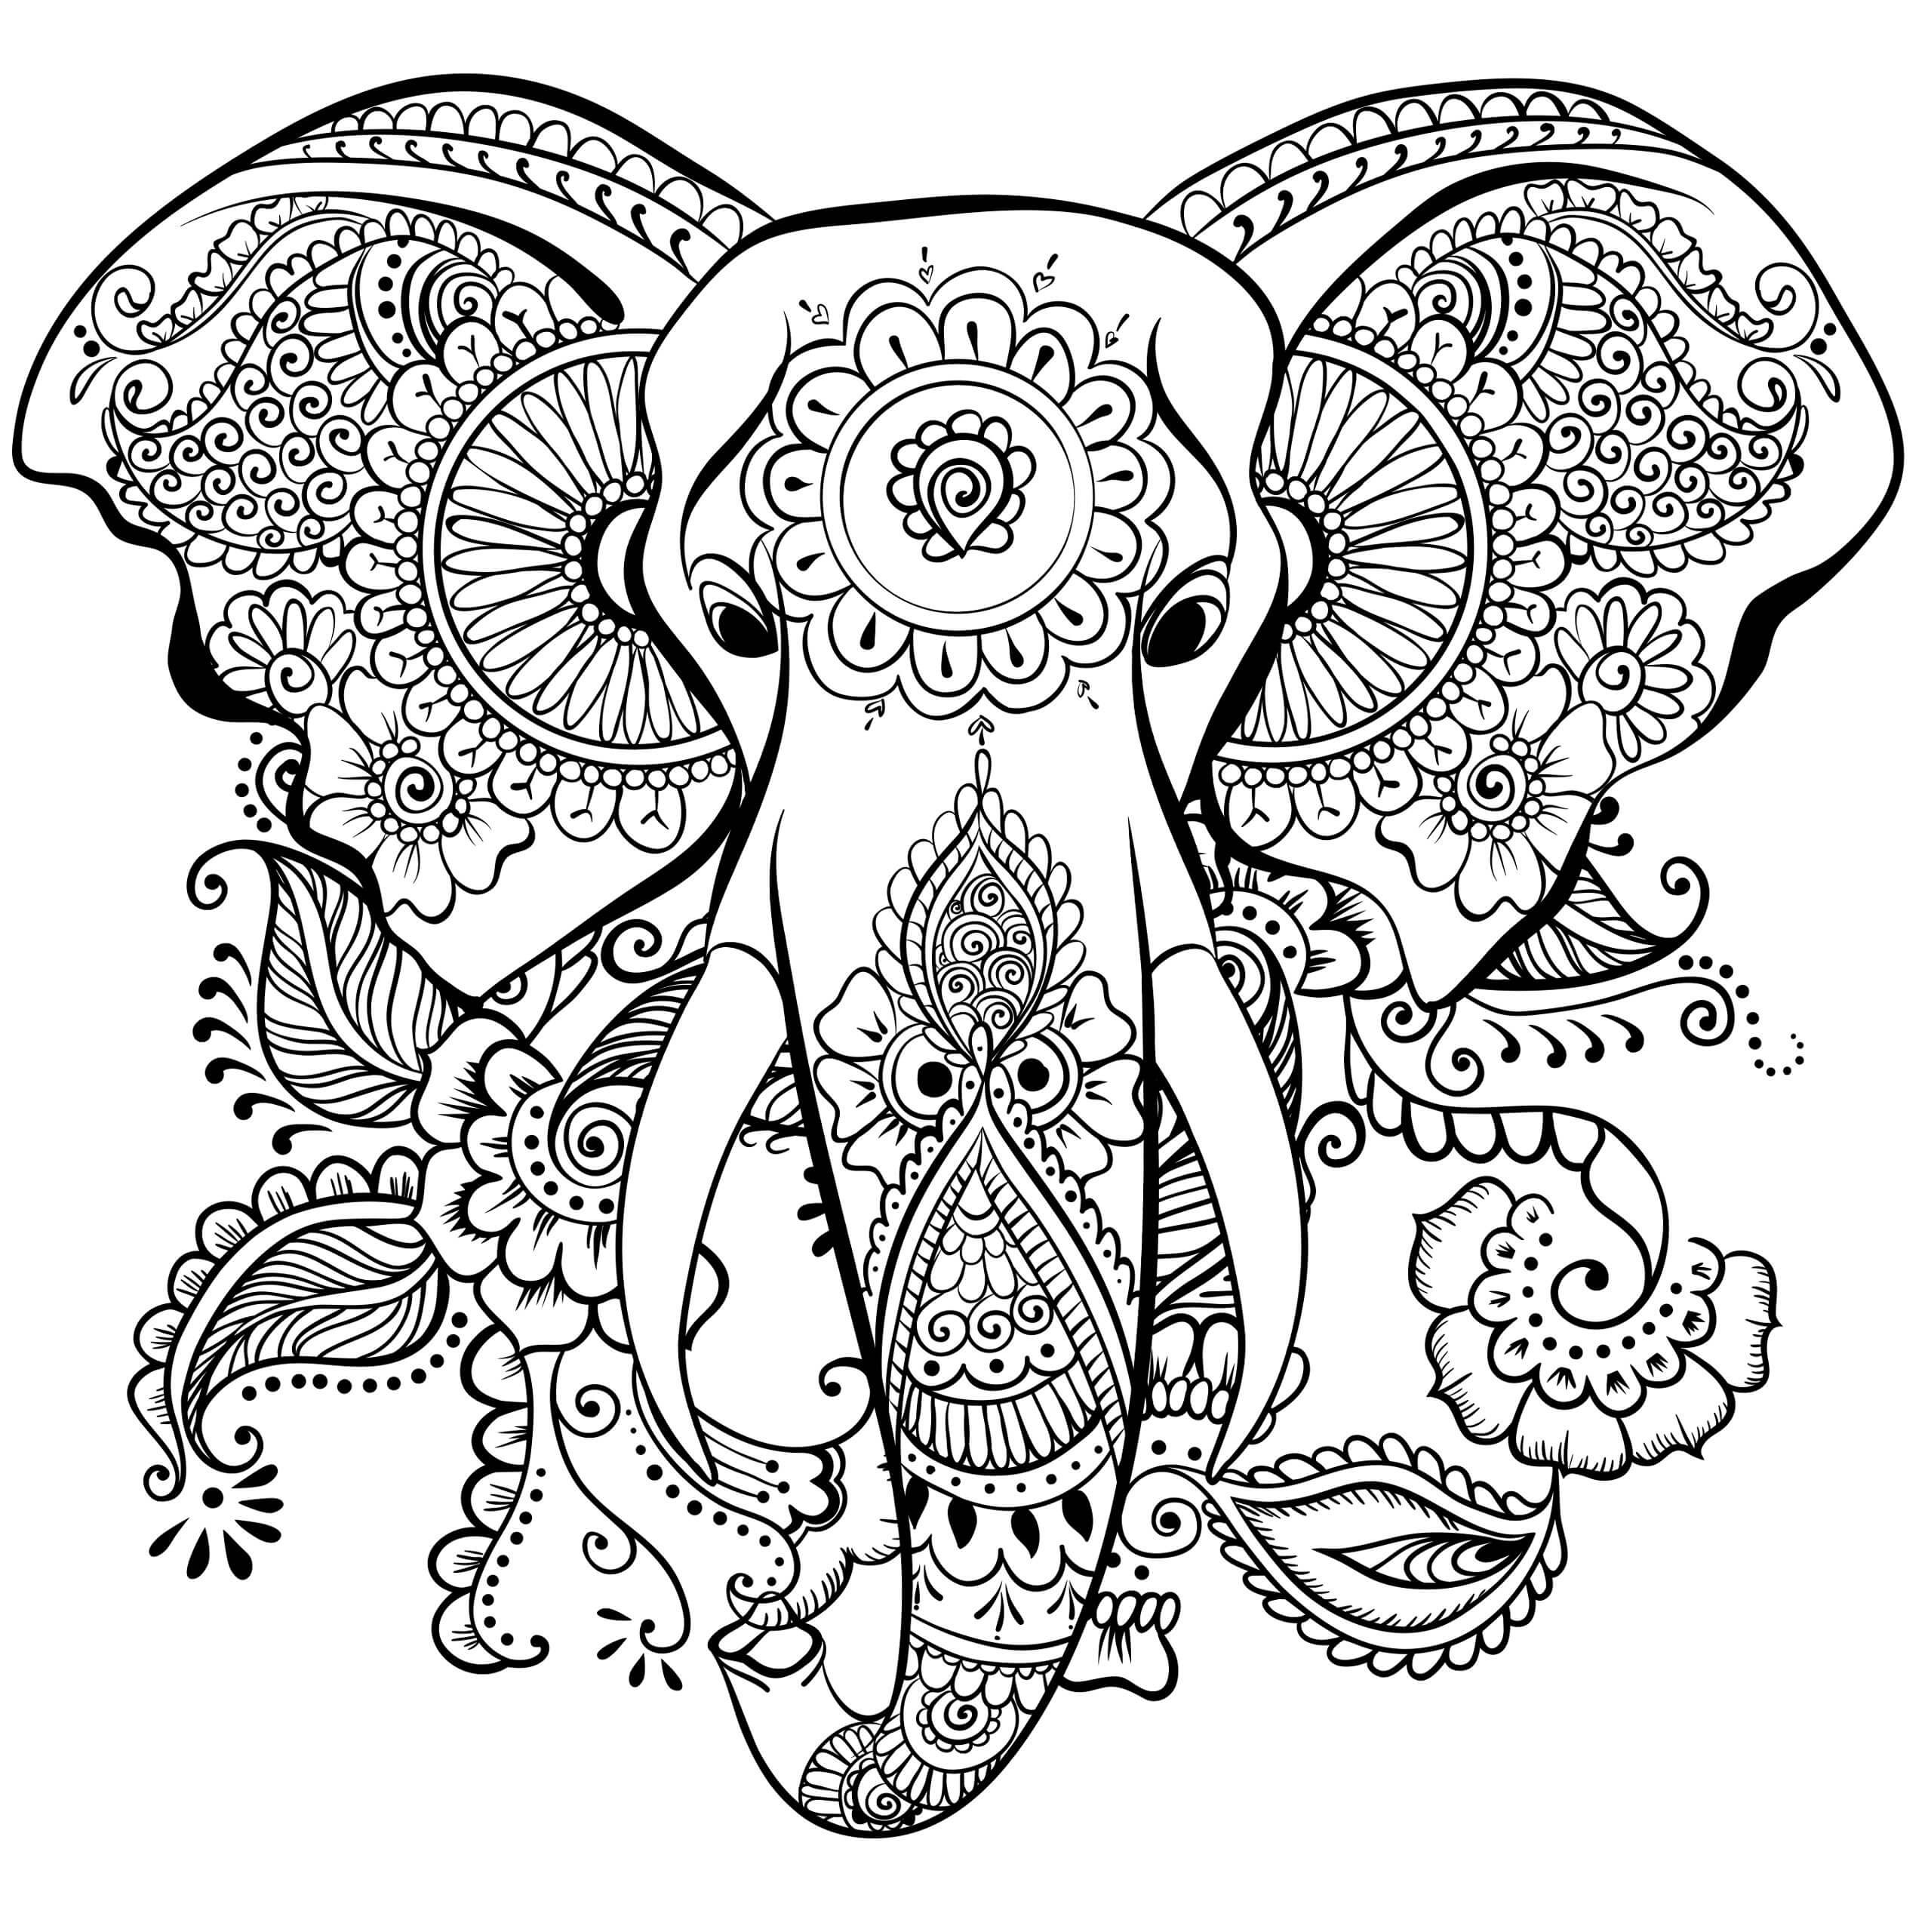 Challenging Coloring Pages For Adults
 Coloring Pages For Adults Difficult Animals 7